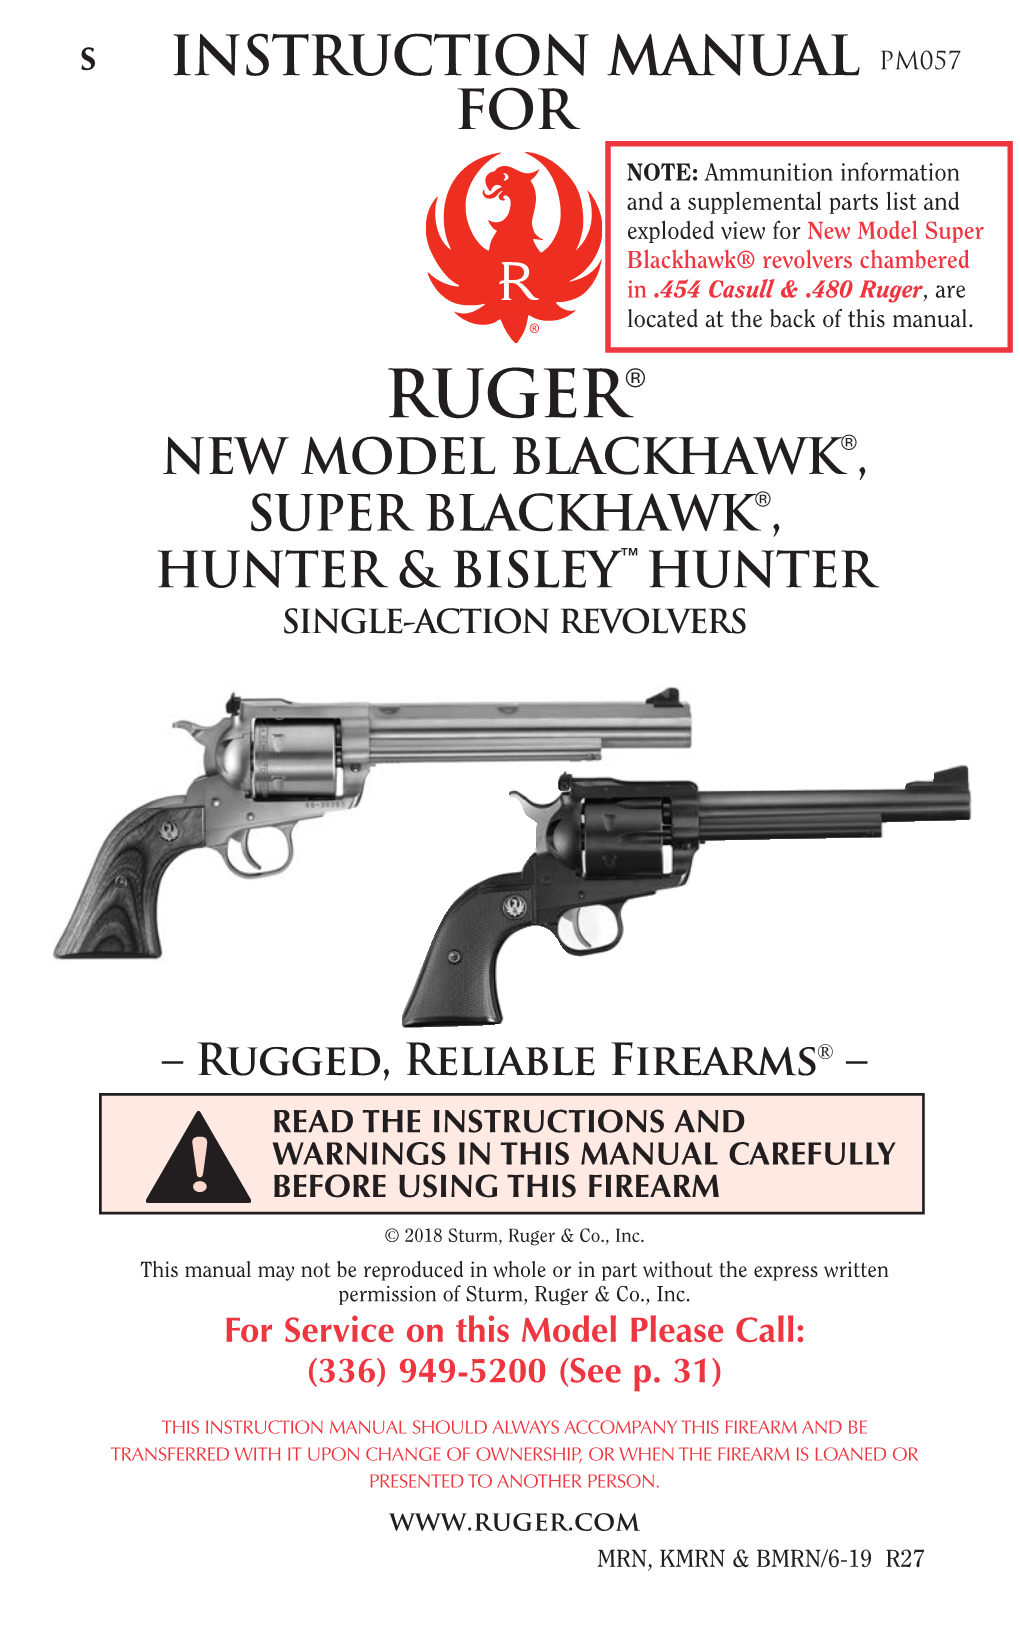 Super Blackhawk® Revolvers Chambered in .454 Casull & .480 Ruger, Are Located at the Back of This Manual